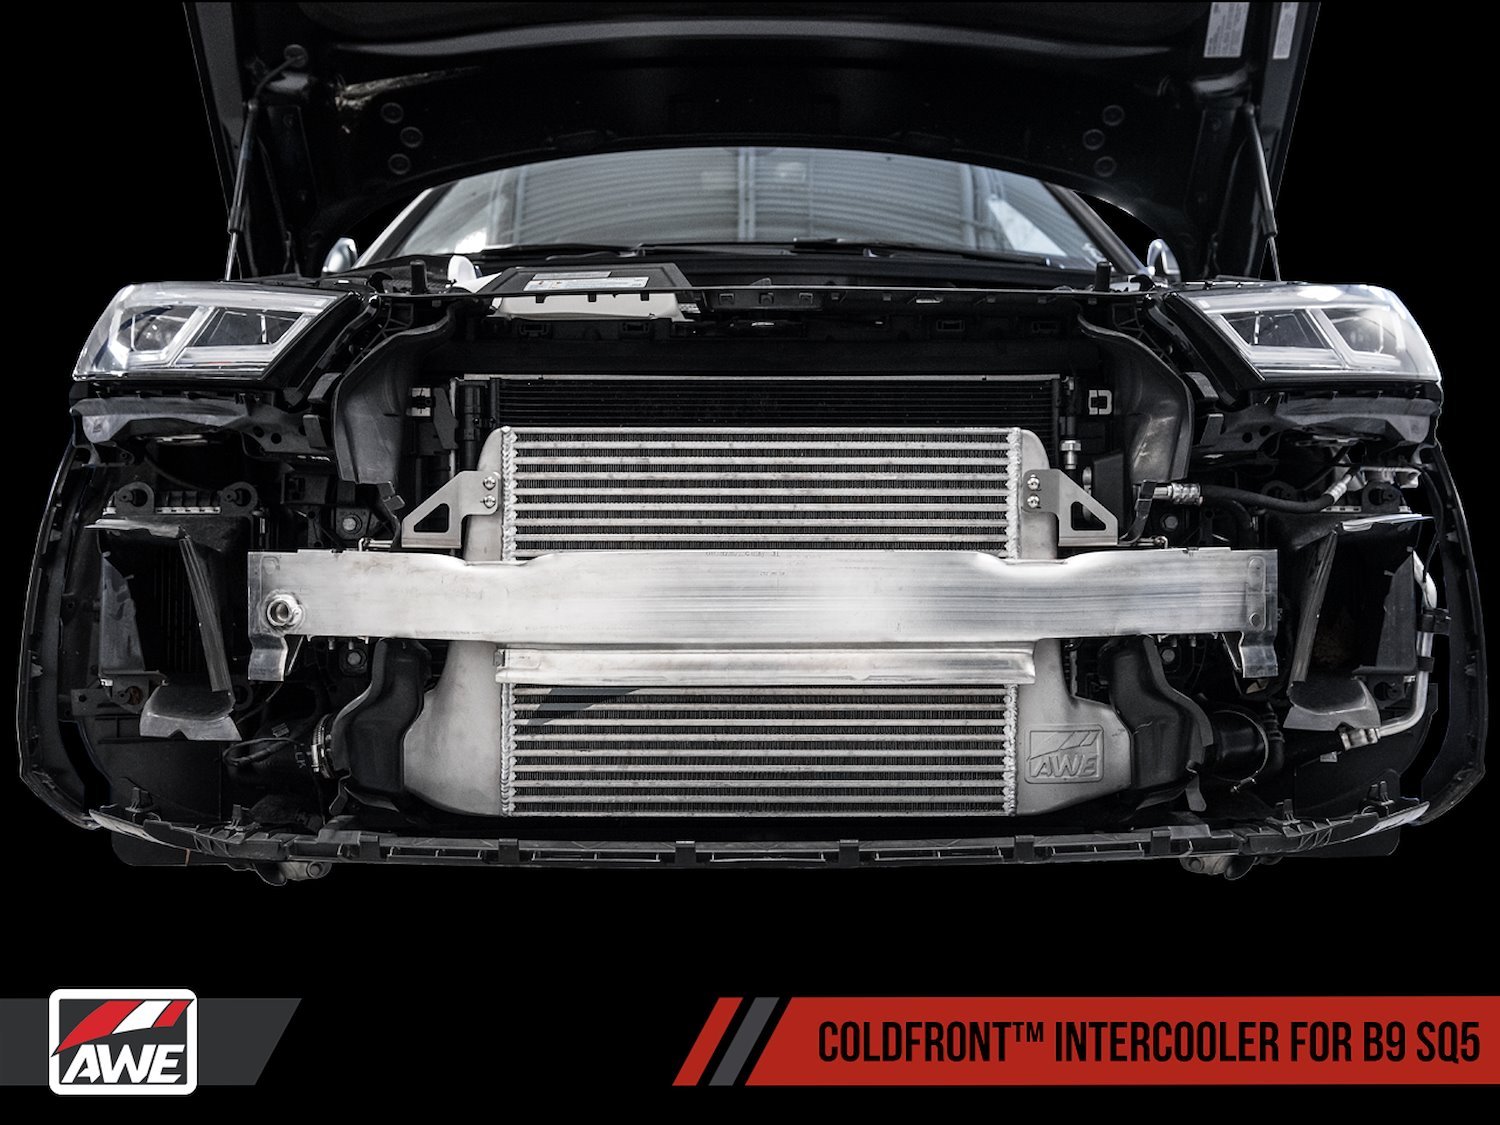 AWE ColdFront Intercooler for the Audi B9 SQ5